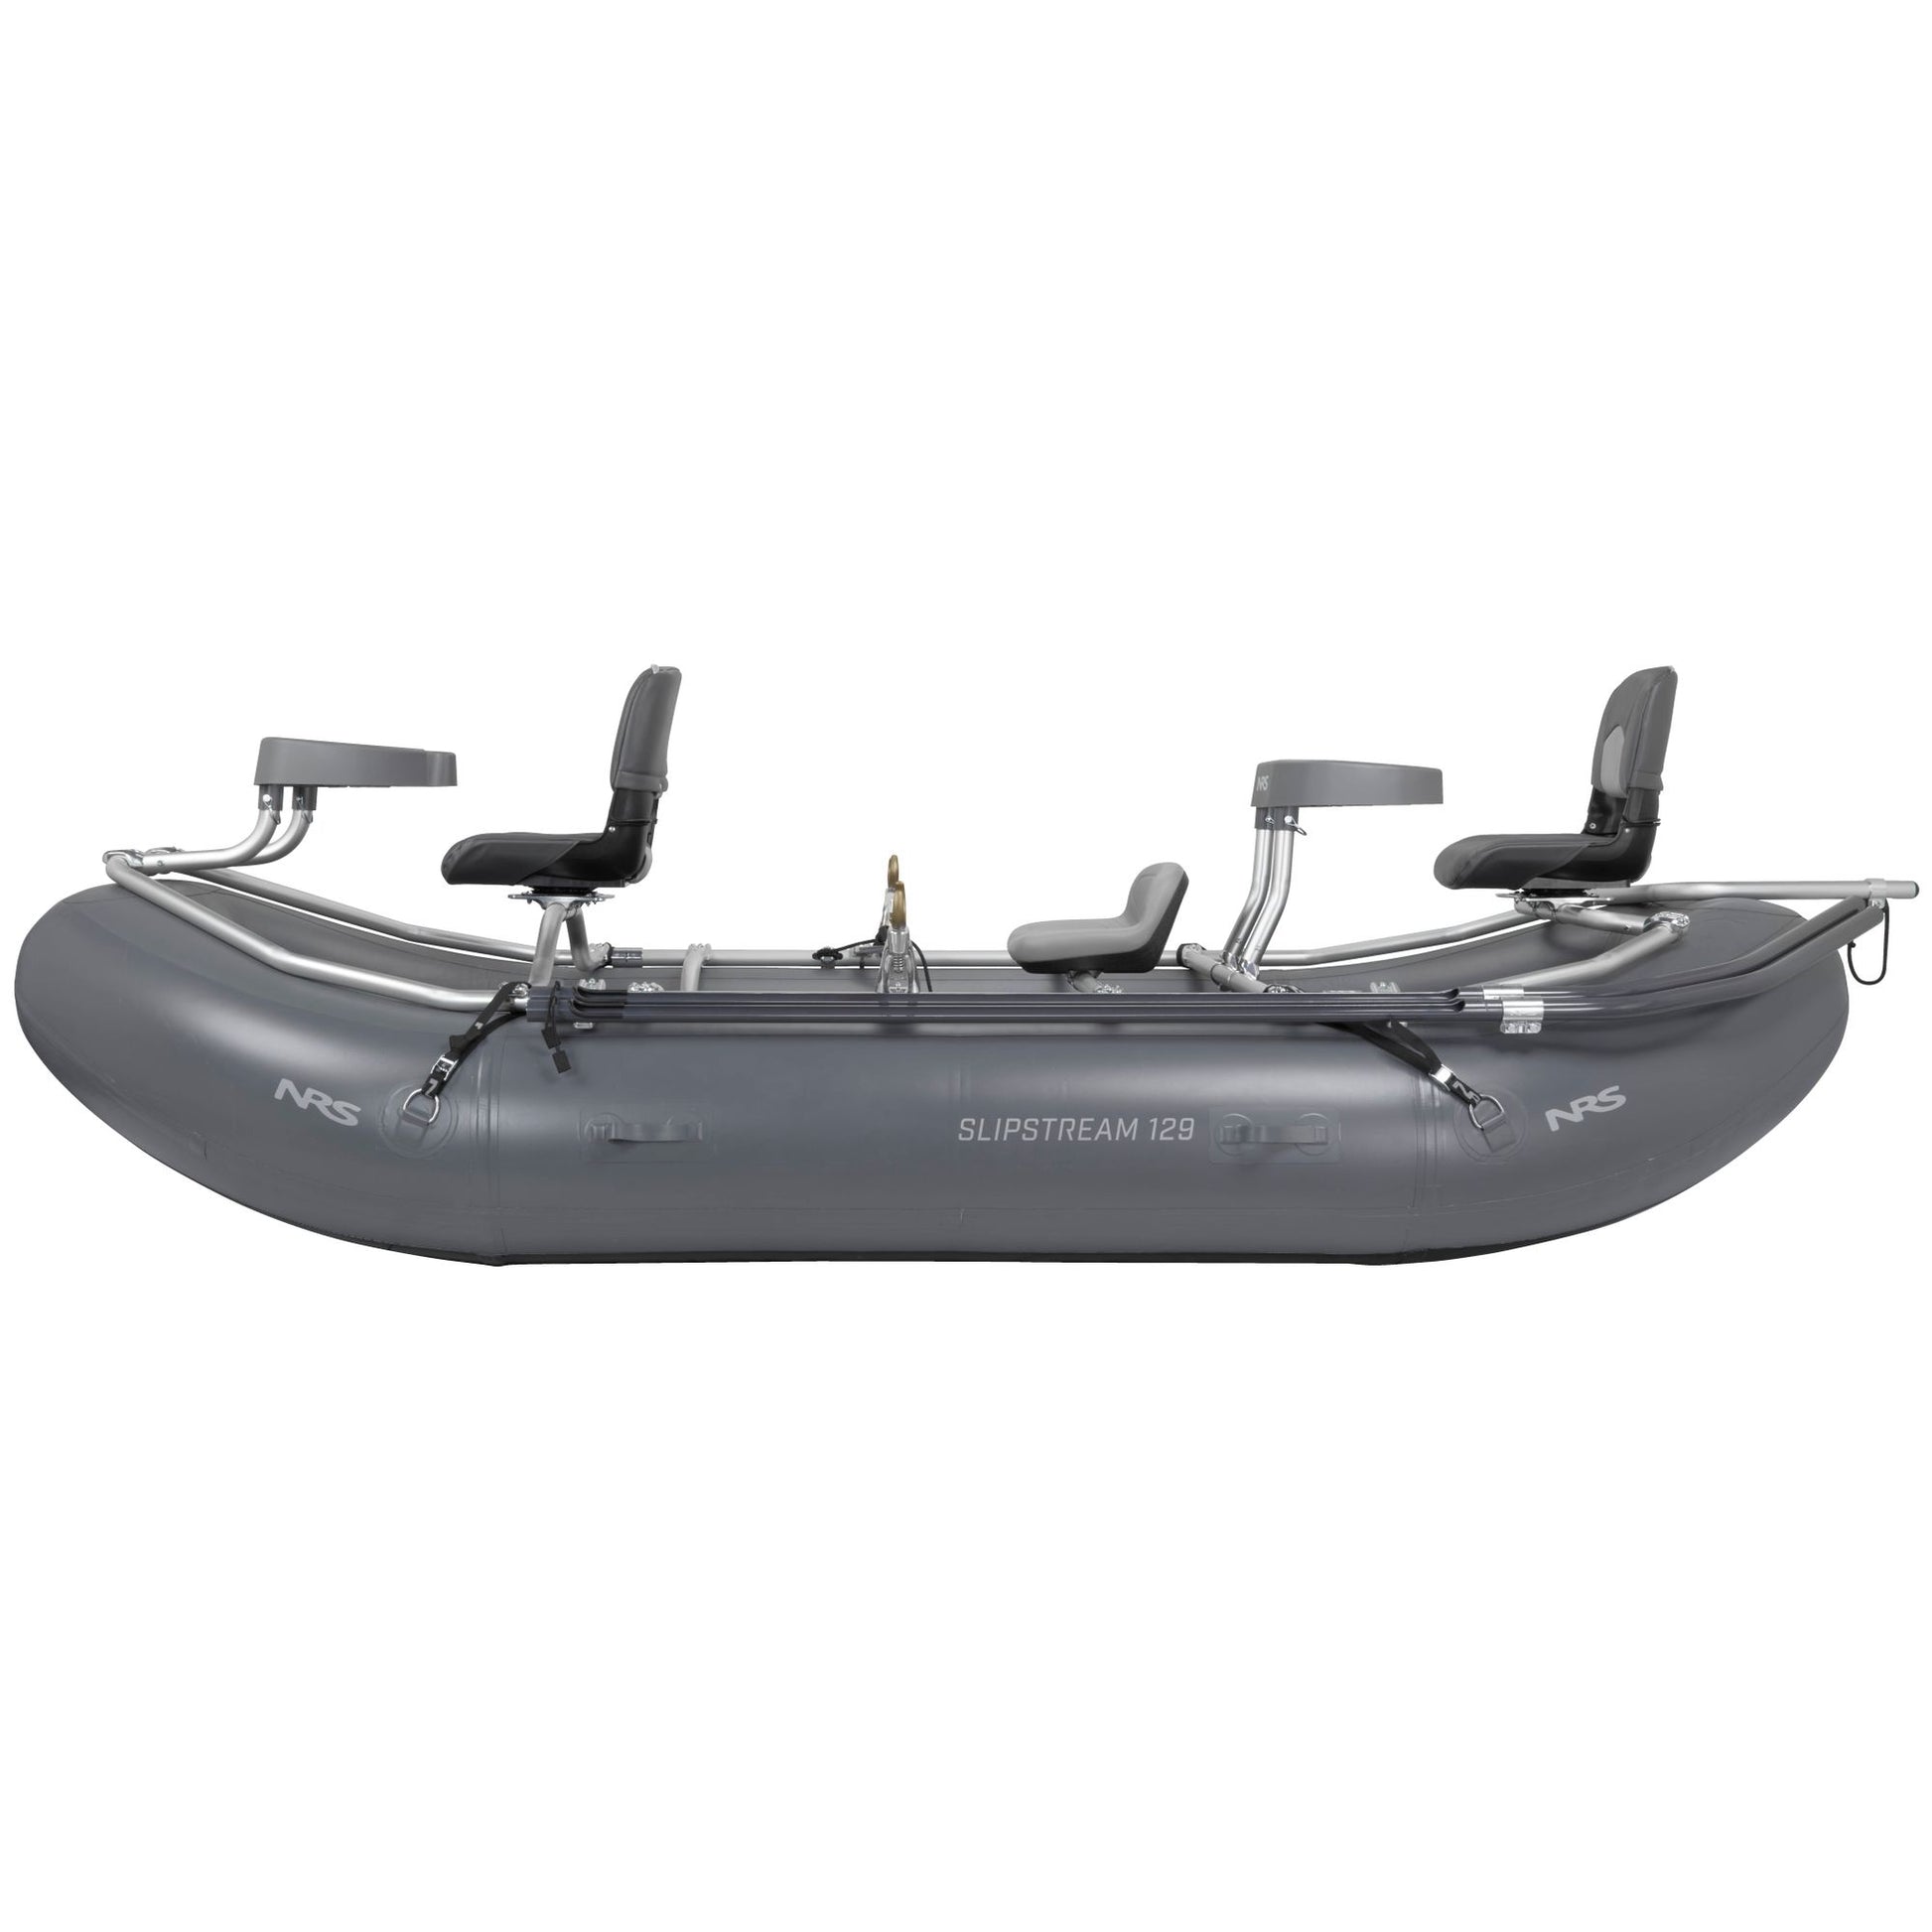 A durable, gray NRS Slipstream Fishing Raft with two seats on it.